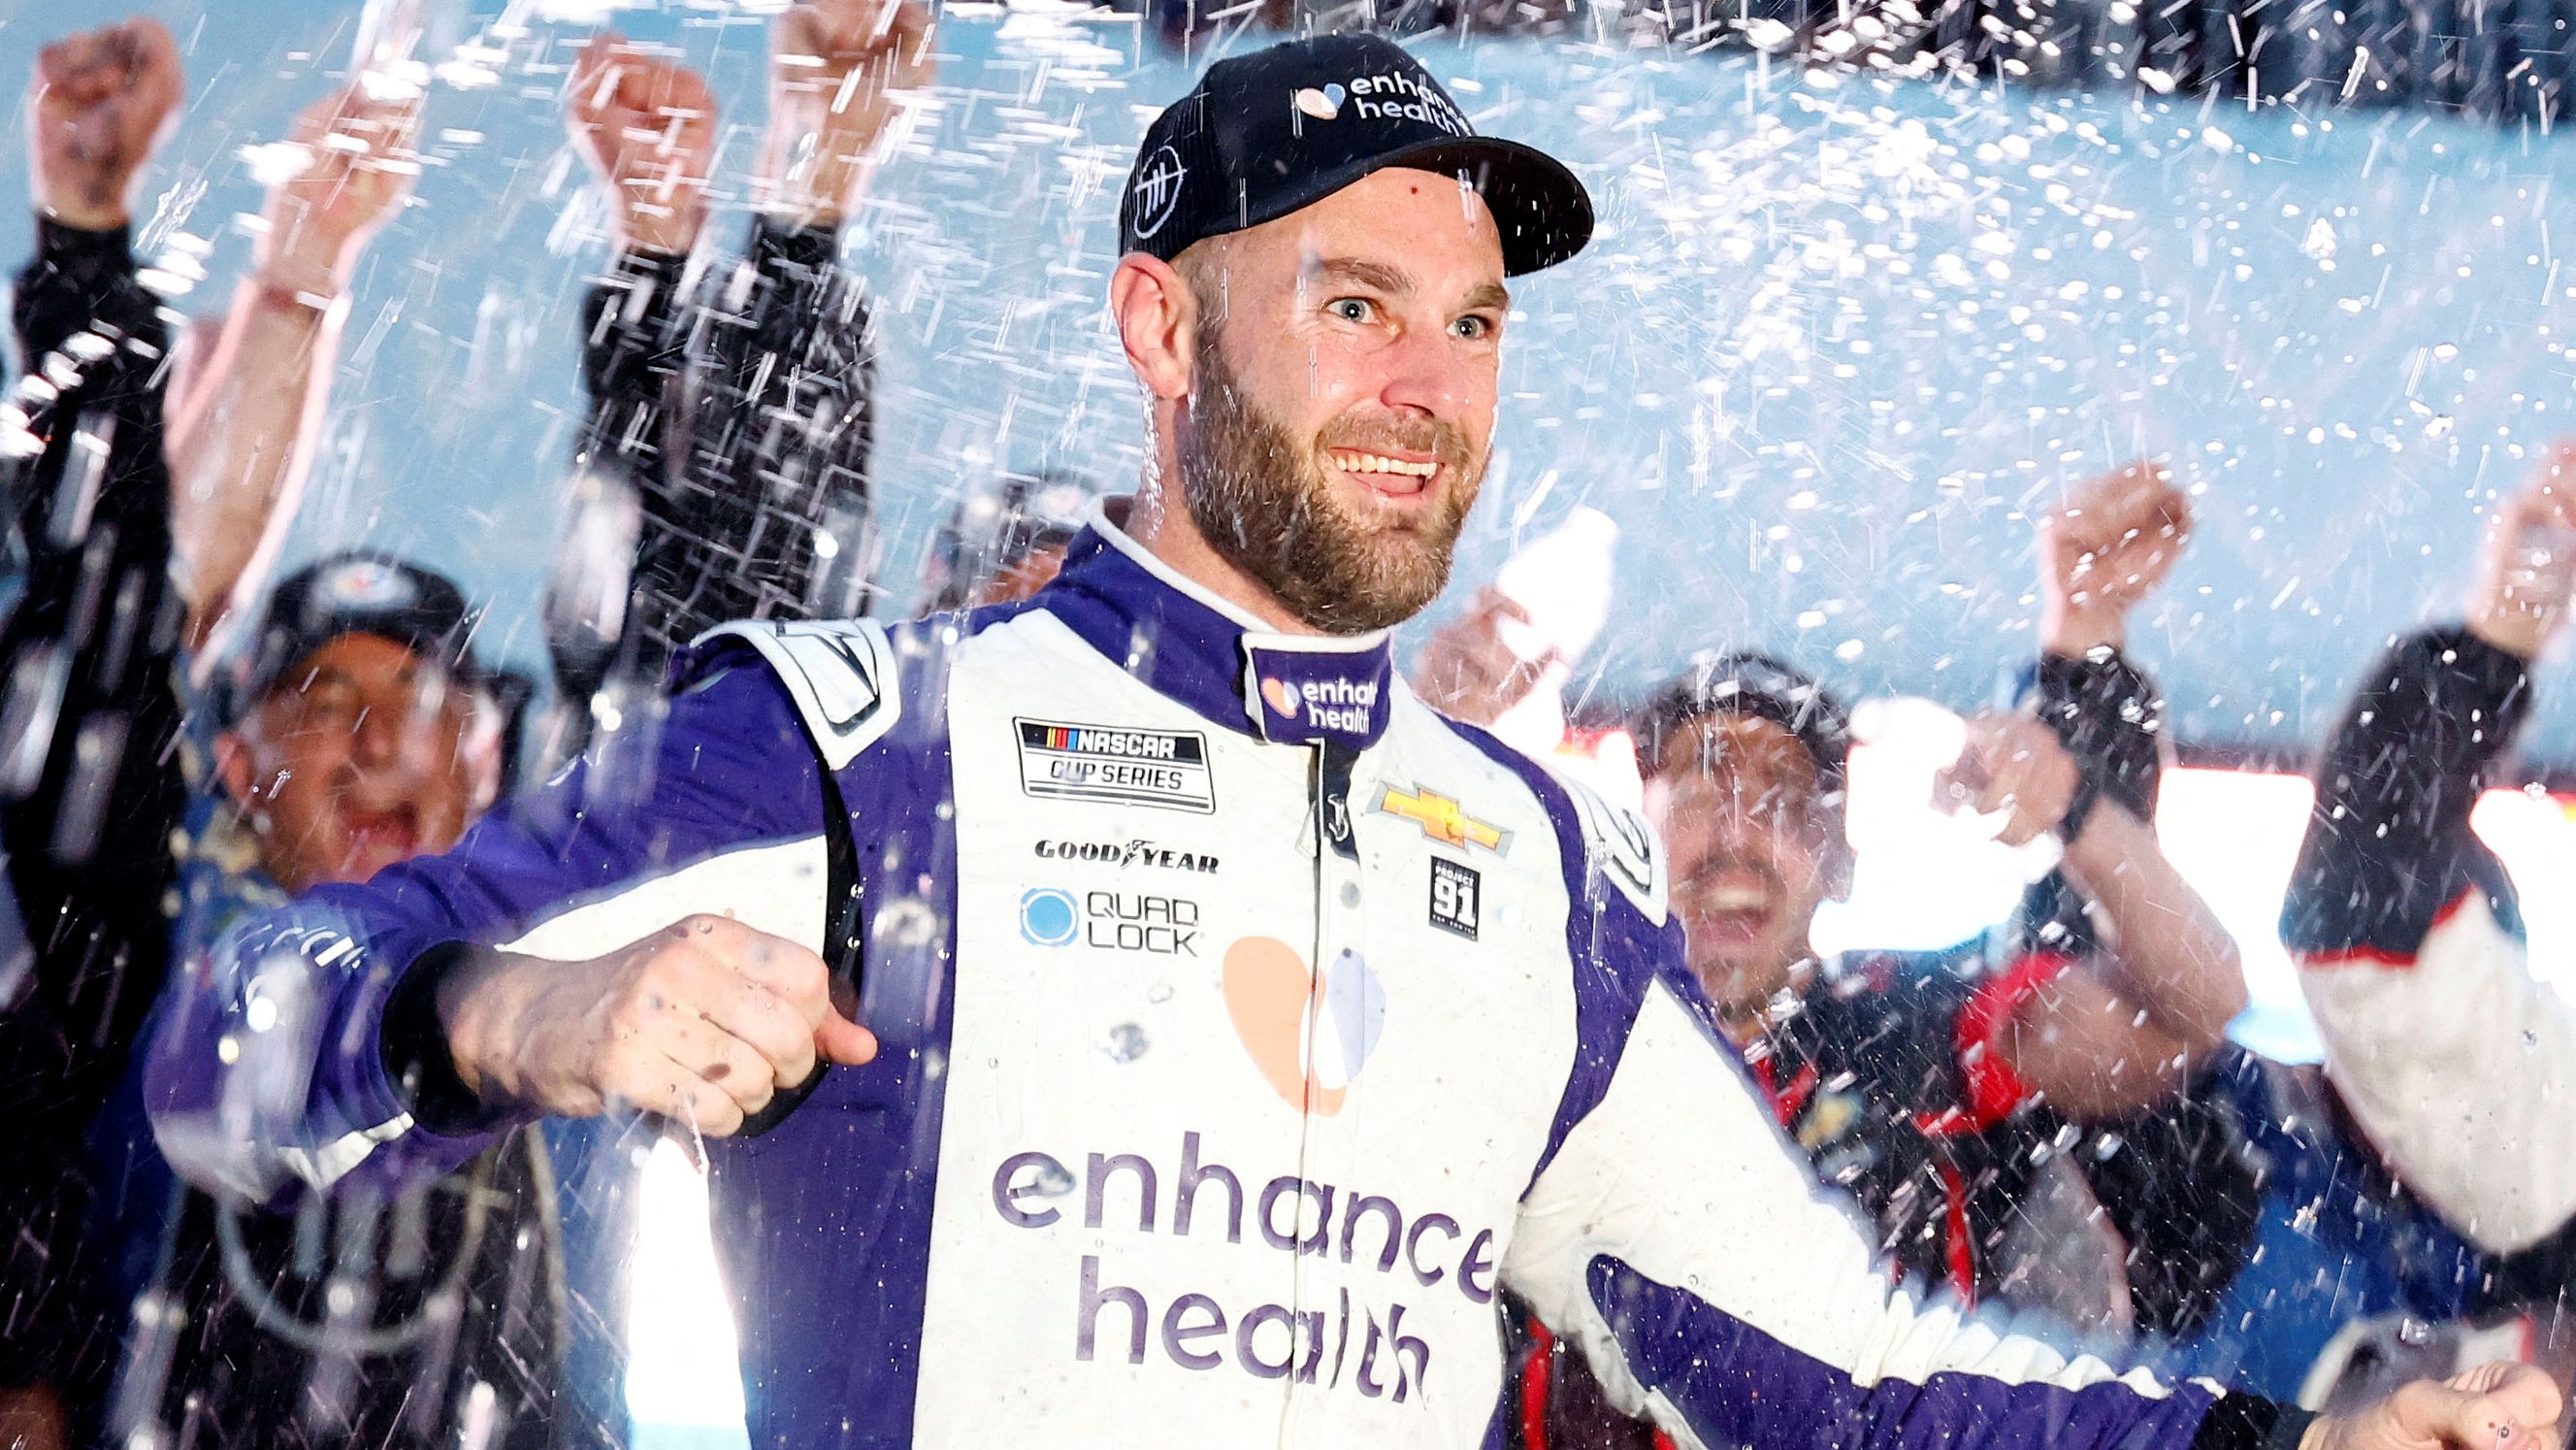 Shane van Gisbergen celebrates after winning his first NASCAR Cup Series race on the streets of Chicago.